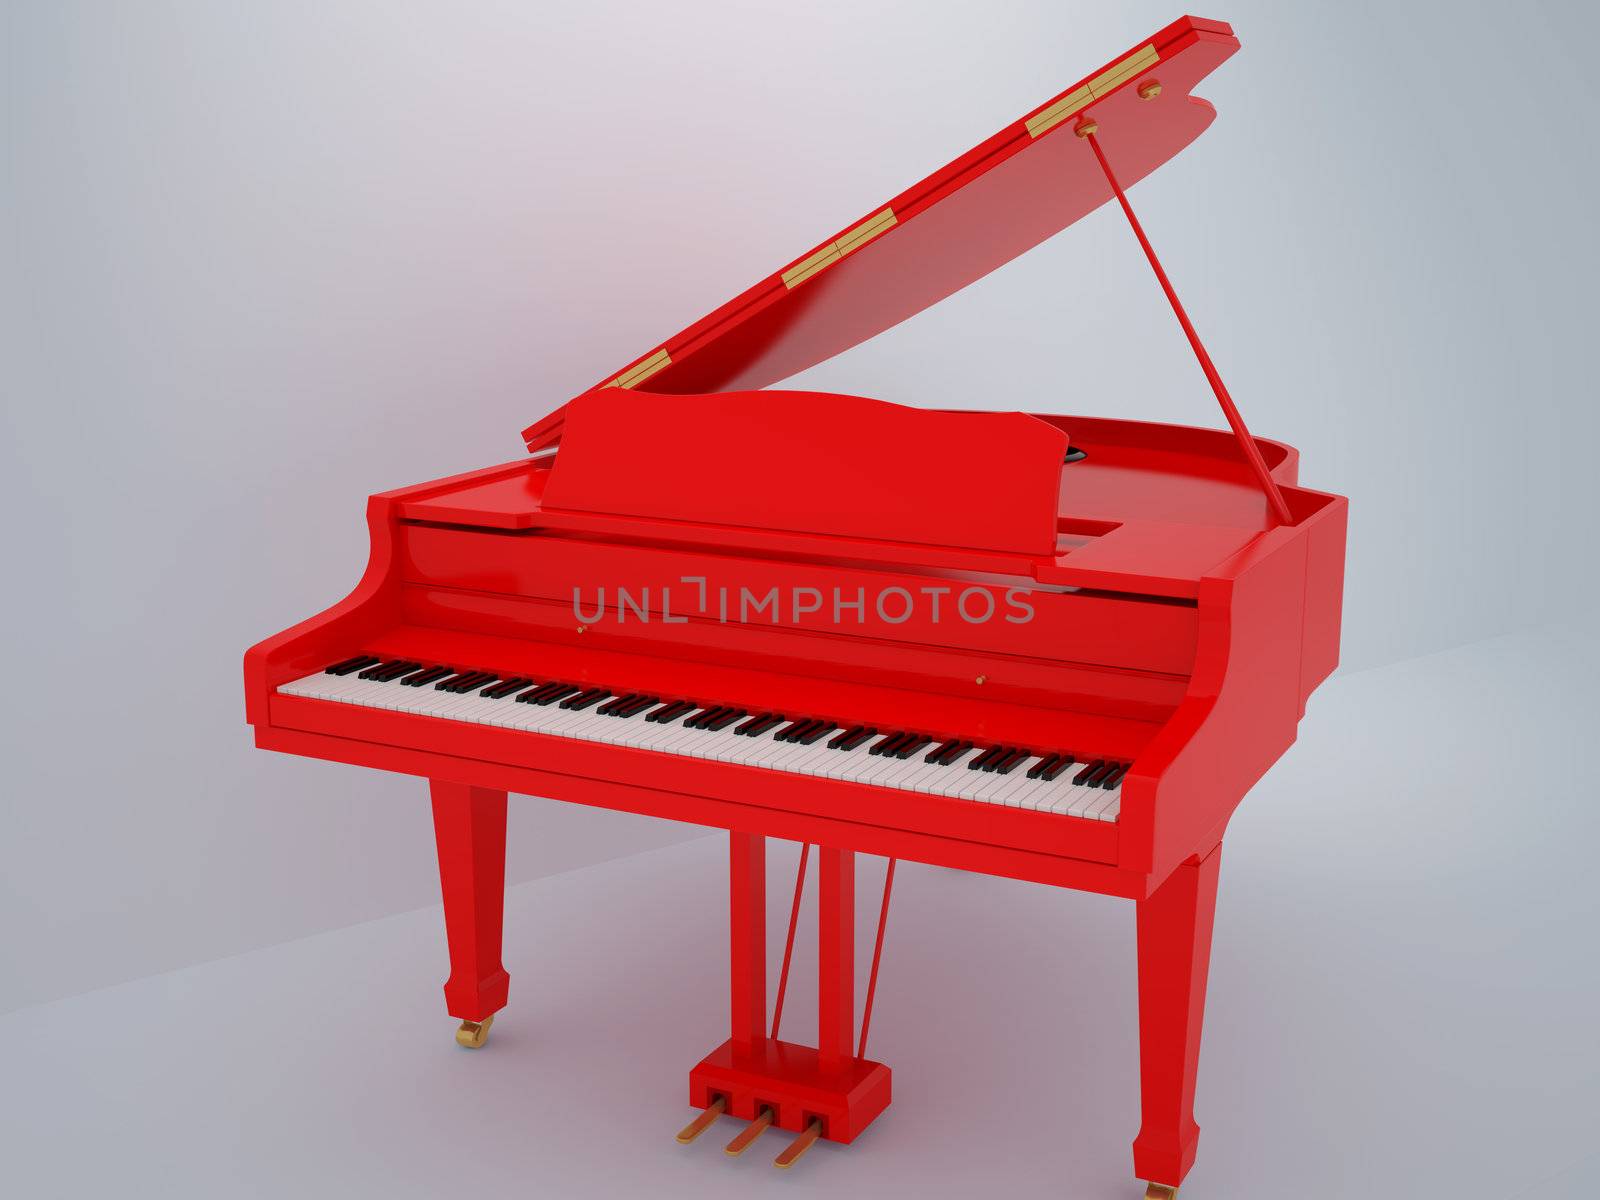 Illustration of a piano. High resolution image. 3d illustration.